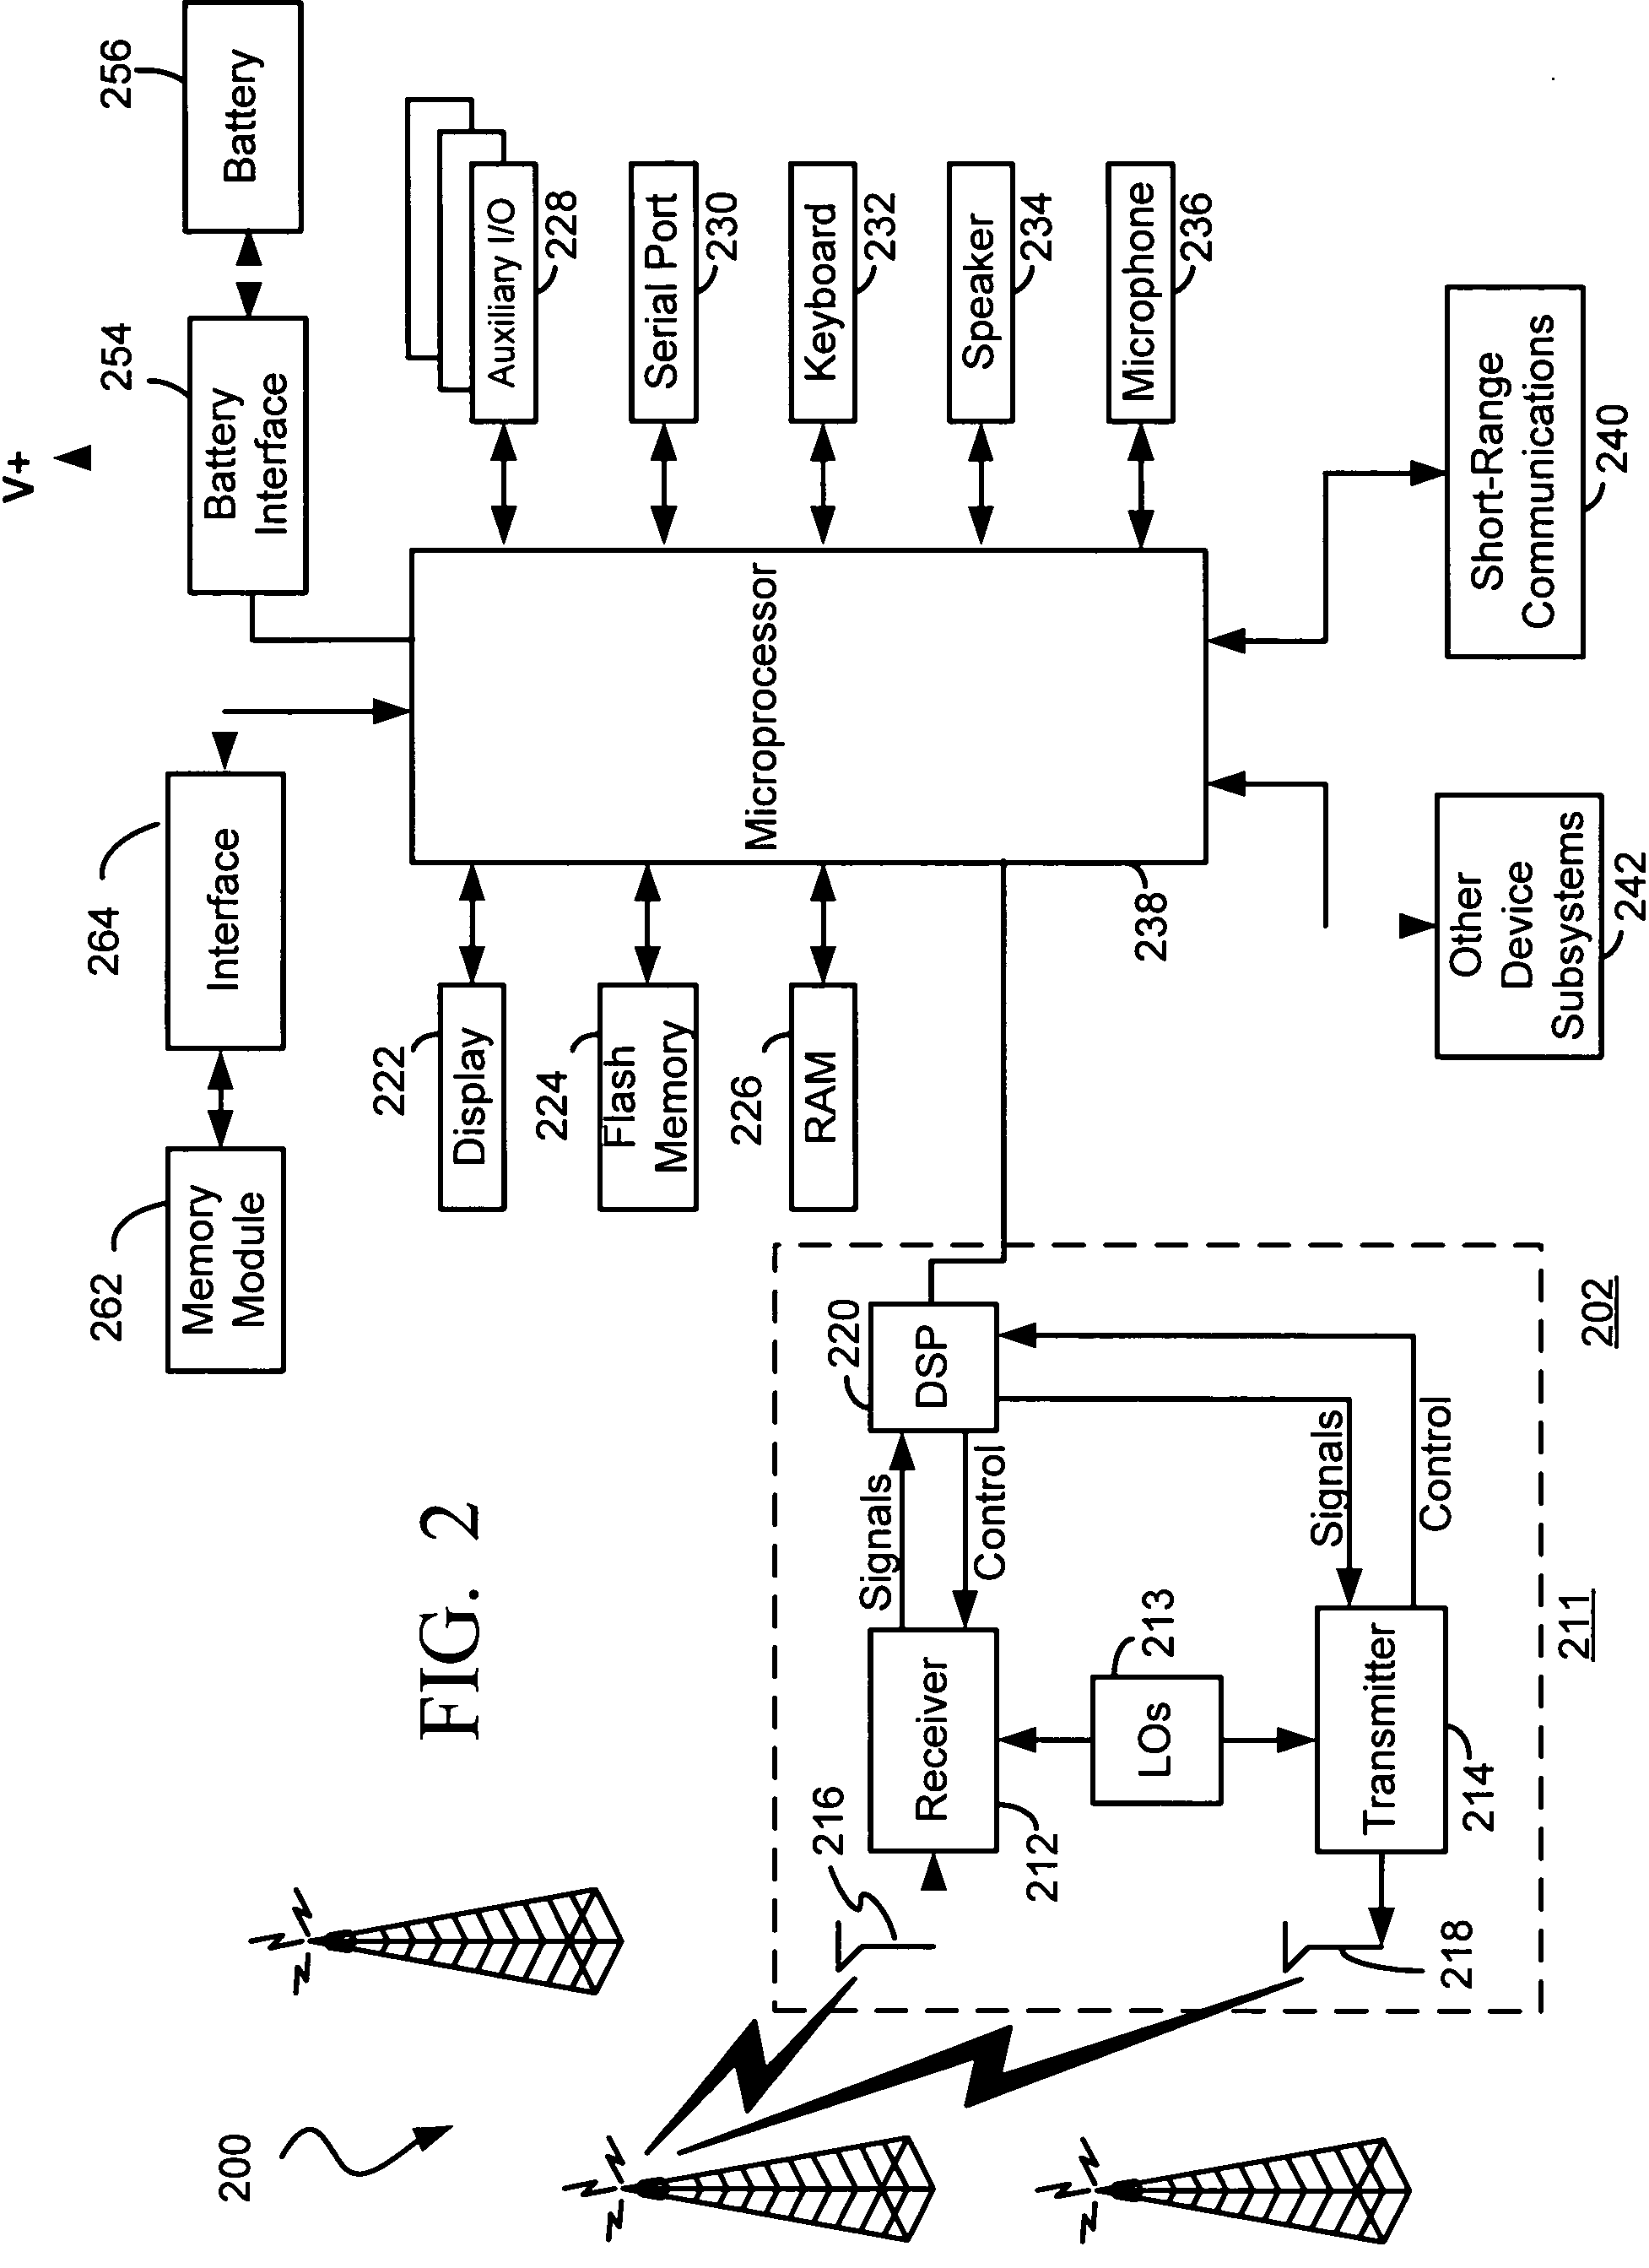 Methods and apparatus for selecting a base station transceiver system based on service communication type